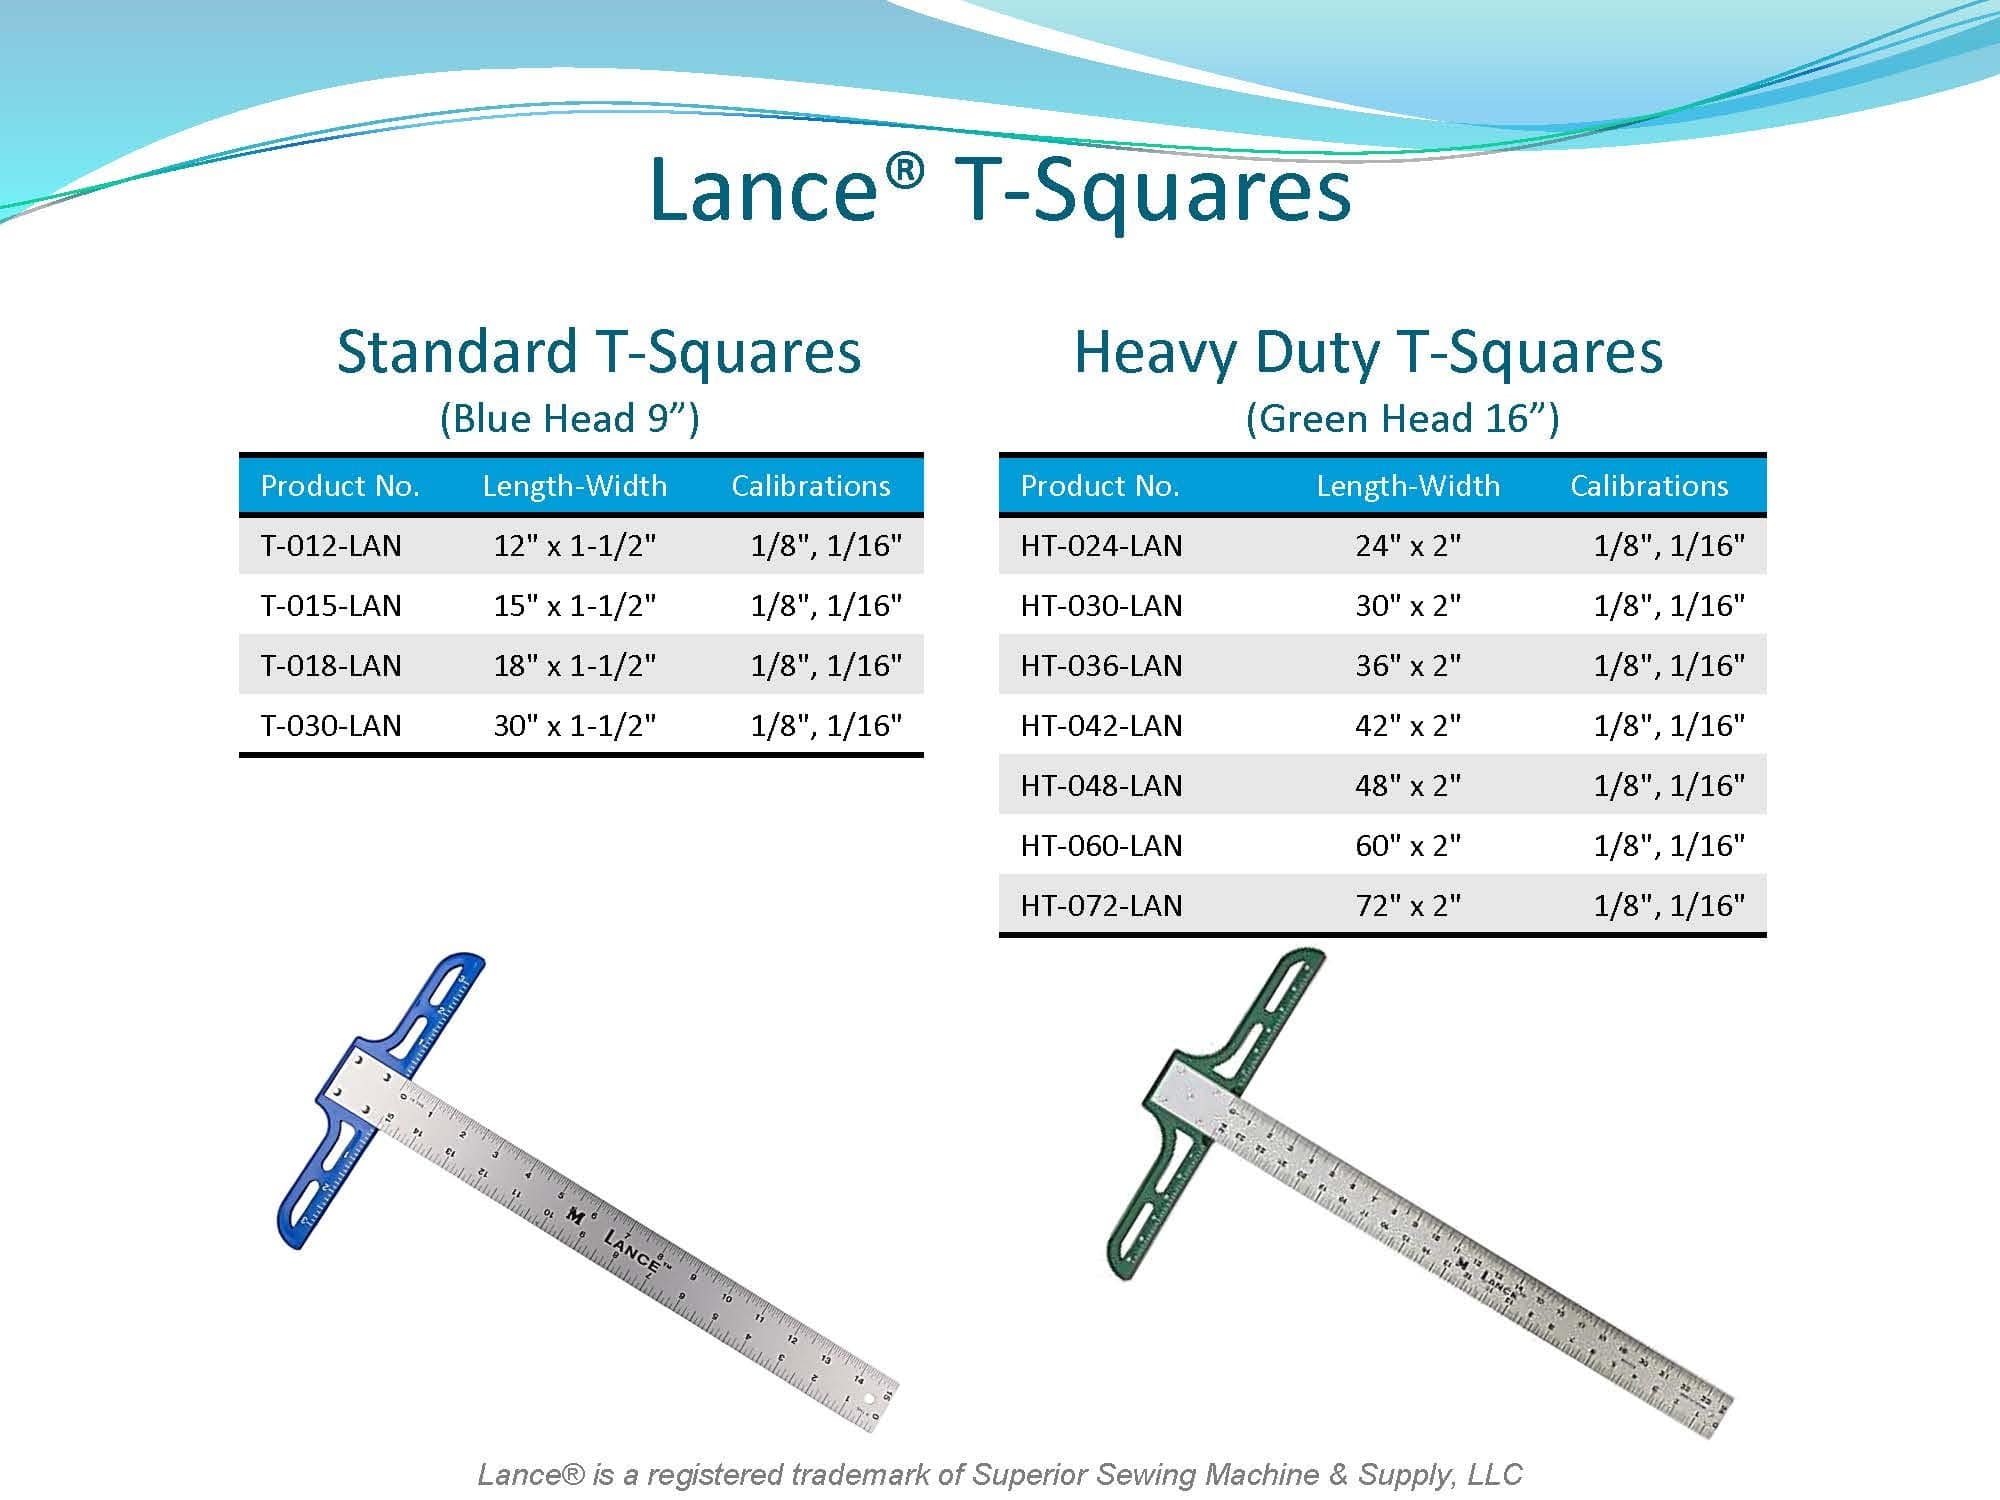 LANCE T-SQUARES

STANDARD T-SQUARES
BLUE HEAD - 9"

HEAVY-DUTY T-SQUARES
GREEN HEAD - 16"

